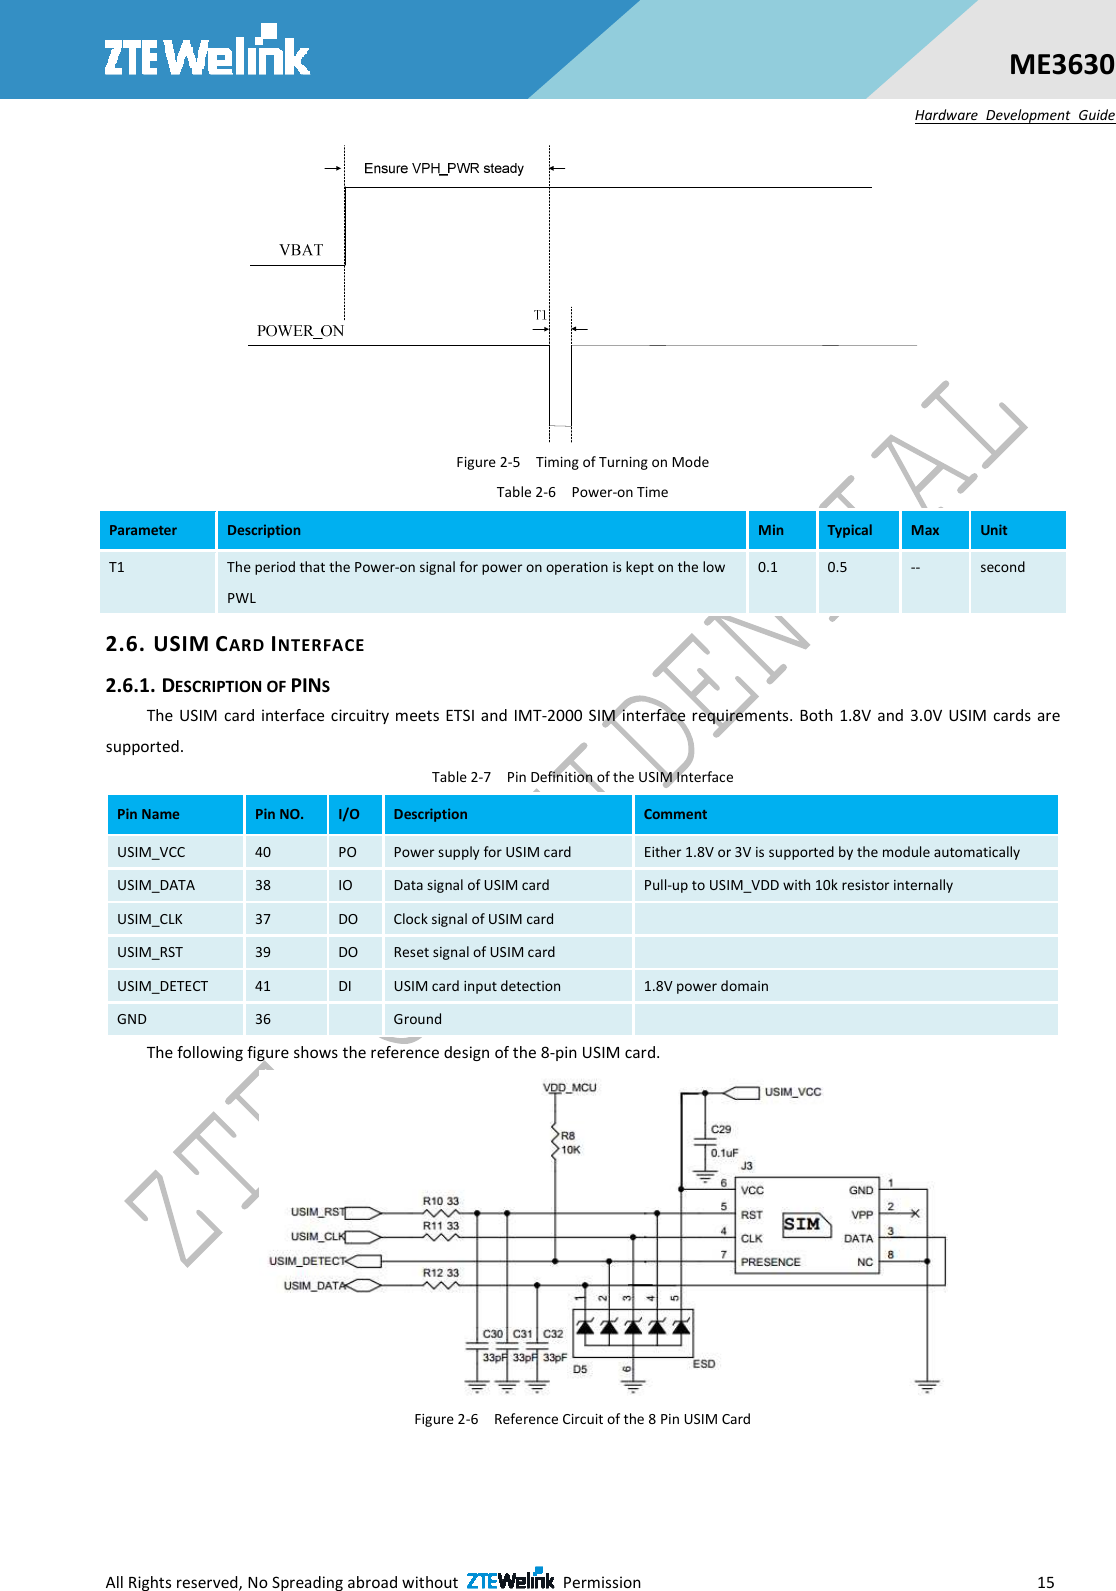  All Rights reserved, No Spreading abroad without    Permission                        15 ME3630 Hardware  Development  Guide  Figure 2-5    Timing of Turning on Mode Table 2-6    Power-on Time Parameter  Description  Min  Typical  Max  Unit T1  The period that the Power-on signal for power on operation is kept on the low PWL 0.1  0.5  --  second 2.6. USIM CARD INTERFACE 2.6.1. DESCRIPTION OF PINS The USIM  card  interface circuitry meets  ETSI and IMT-2000 SIM interface requirements.  Both 1.8V and  3.0V  USIM cards are supported. Table 2-7    Pin Definition of the USIM Interface Pin Name  Pin NO.  I/O  Description  Comment USIM_VCC  40  PO  Power supply for USIM card  Either 1.8V or 3V is supported by the module automatically USIM_DATA  38  IO  Data signal of USIM card  Pull-up to USIM_VDD with 10k resistor internally USIM_CLK  37  DO  Clock signal of USIM card   USIM_RST  39  DO  Reset signal of USIM card   USIM_DETECT  41  DI  USIM card input detection  1.8V power domain GND  36    Ground   The following figure shows the reference design of the 8-pin USIM card.  Figure 2-6    Reference Circuit of the 8 Pin USIM Card  